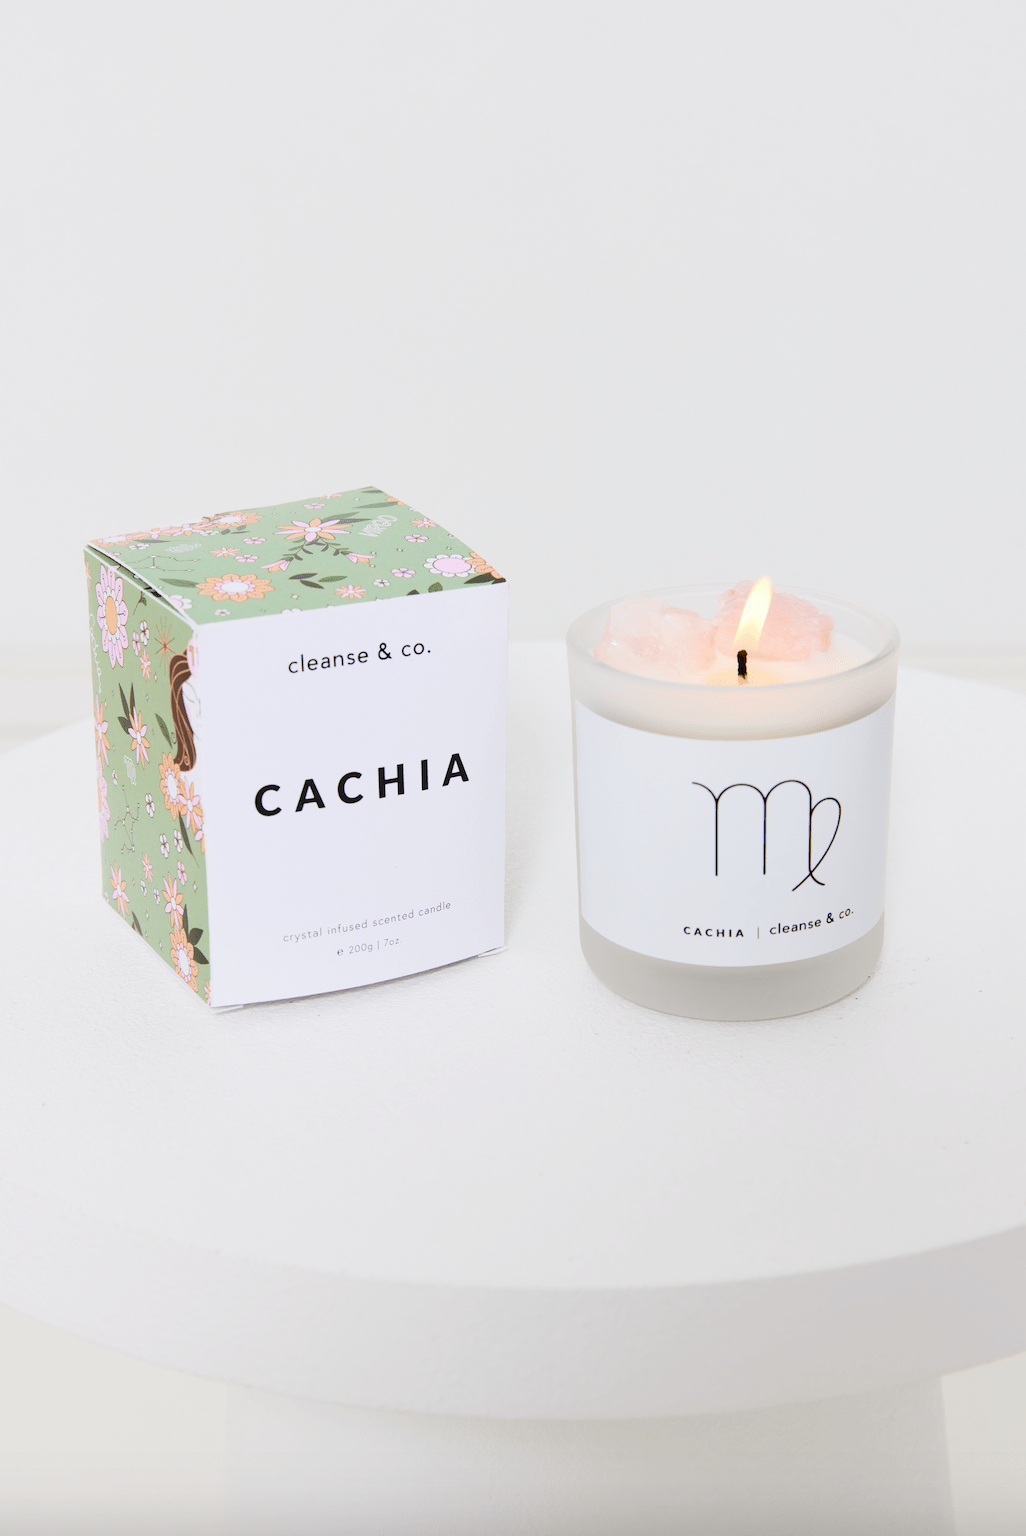 Cachia Virgo Crystal Candle candle